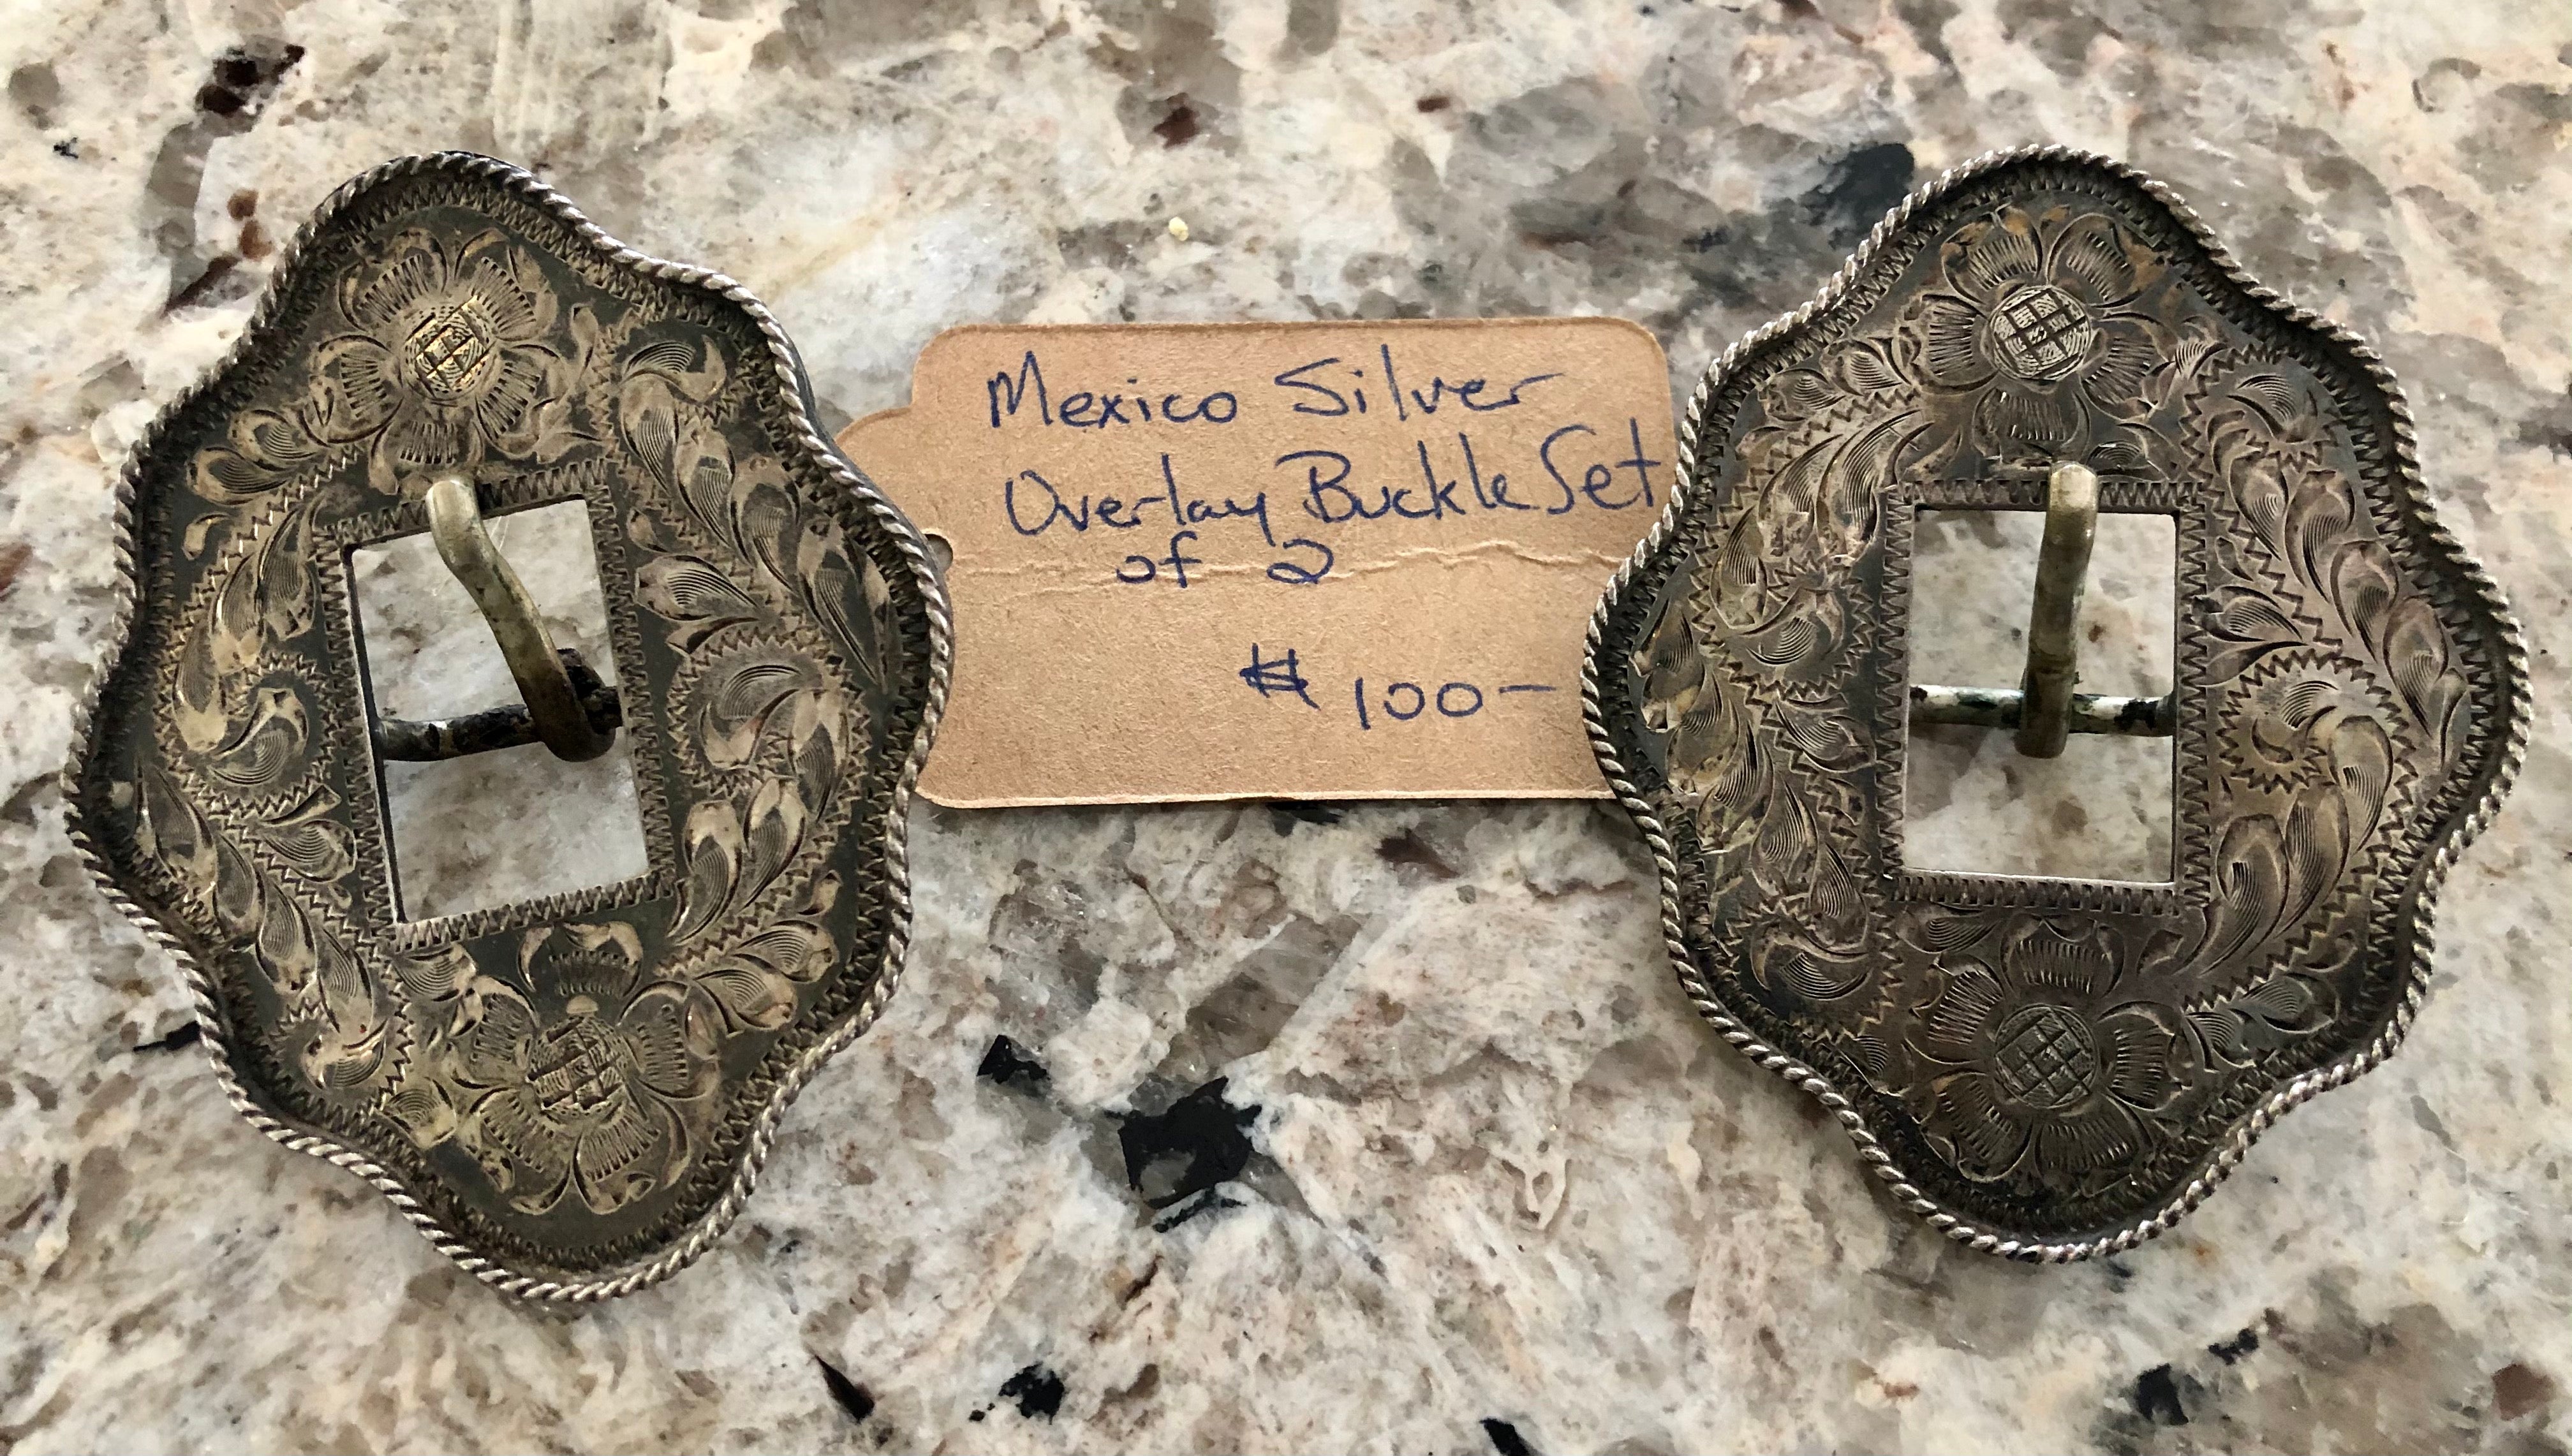 Mexico Silver Overlay Buckle Set w/ 5/8” Opening